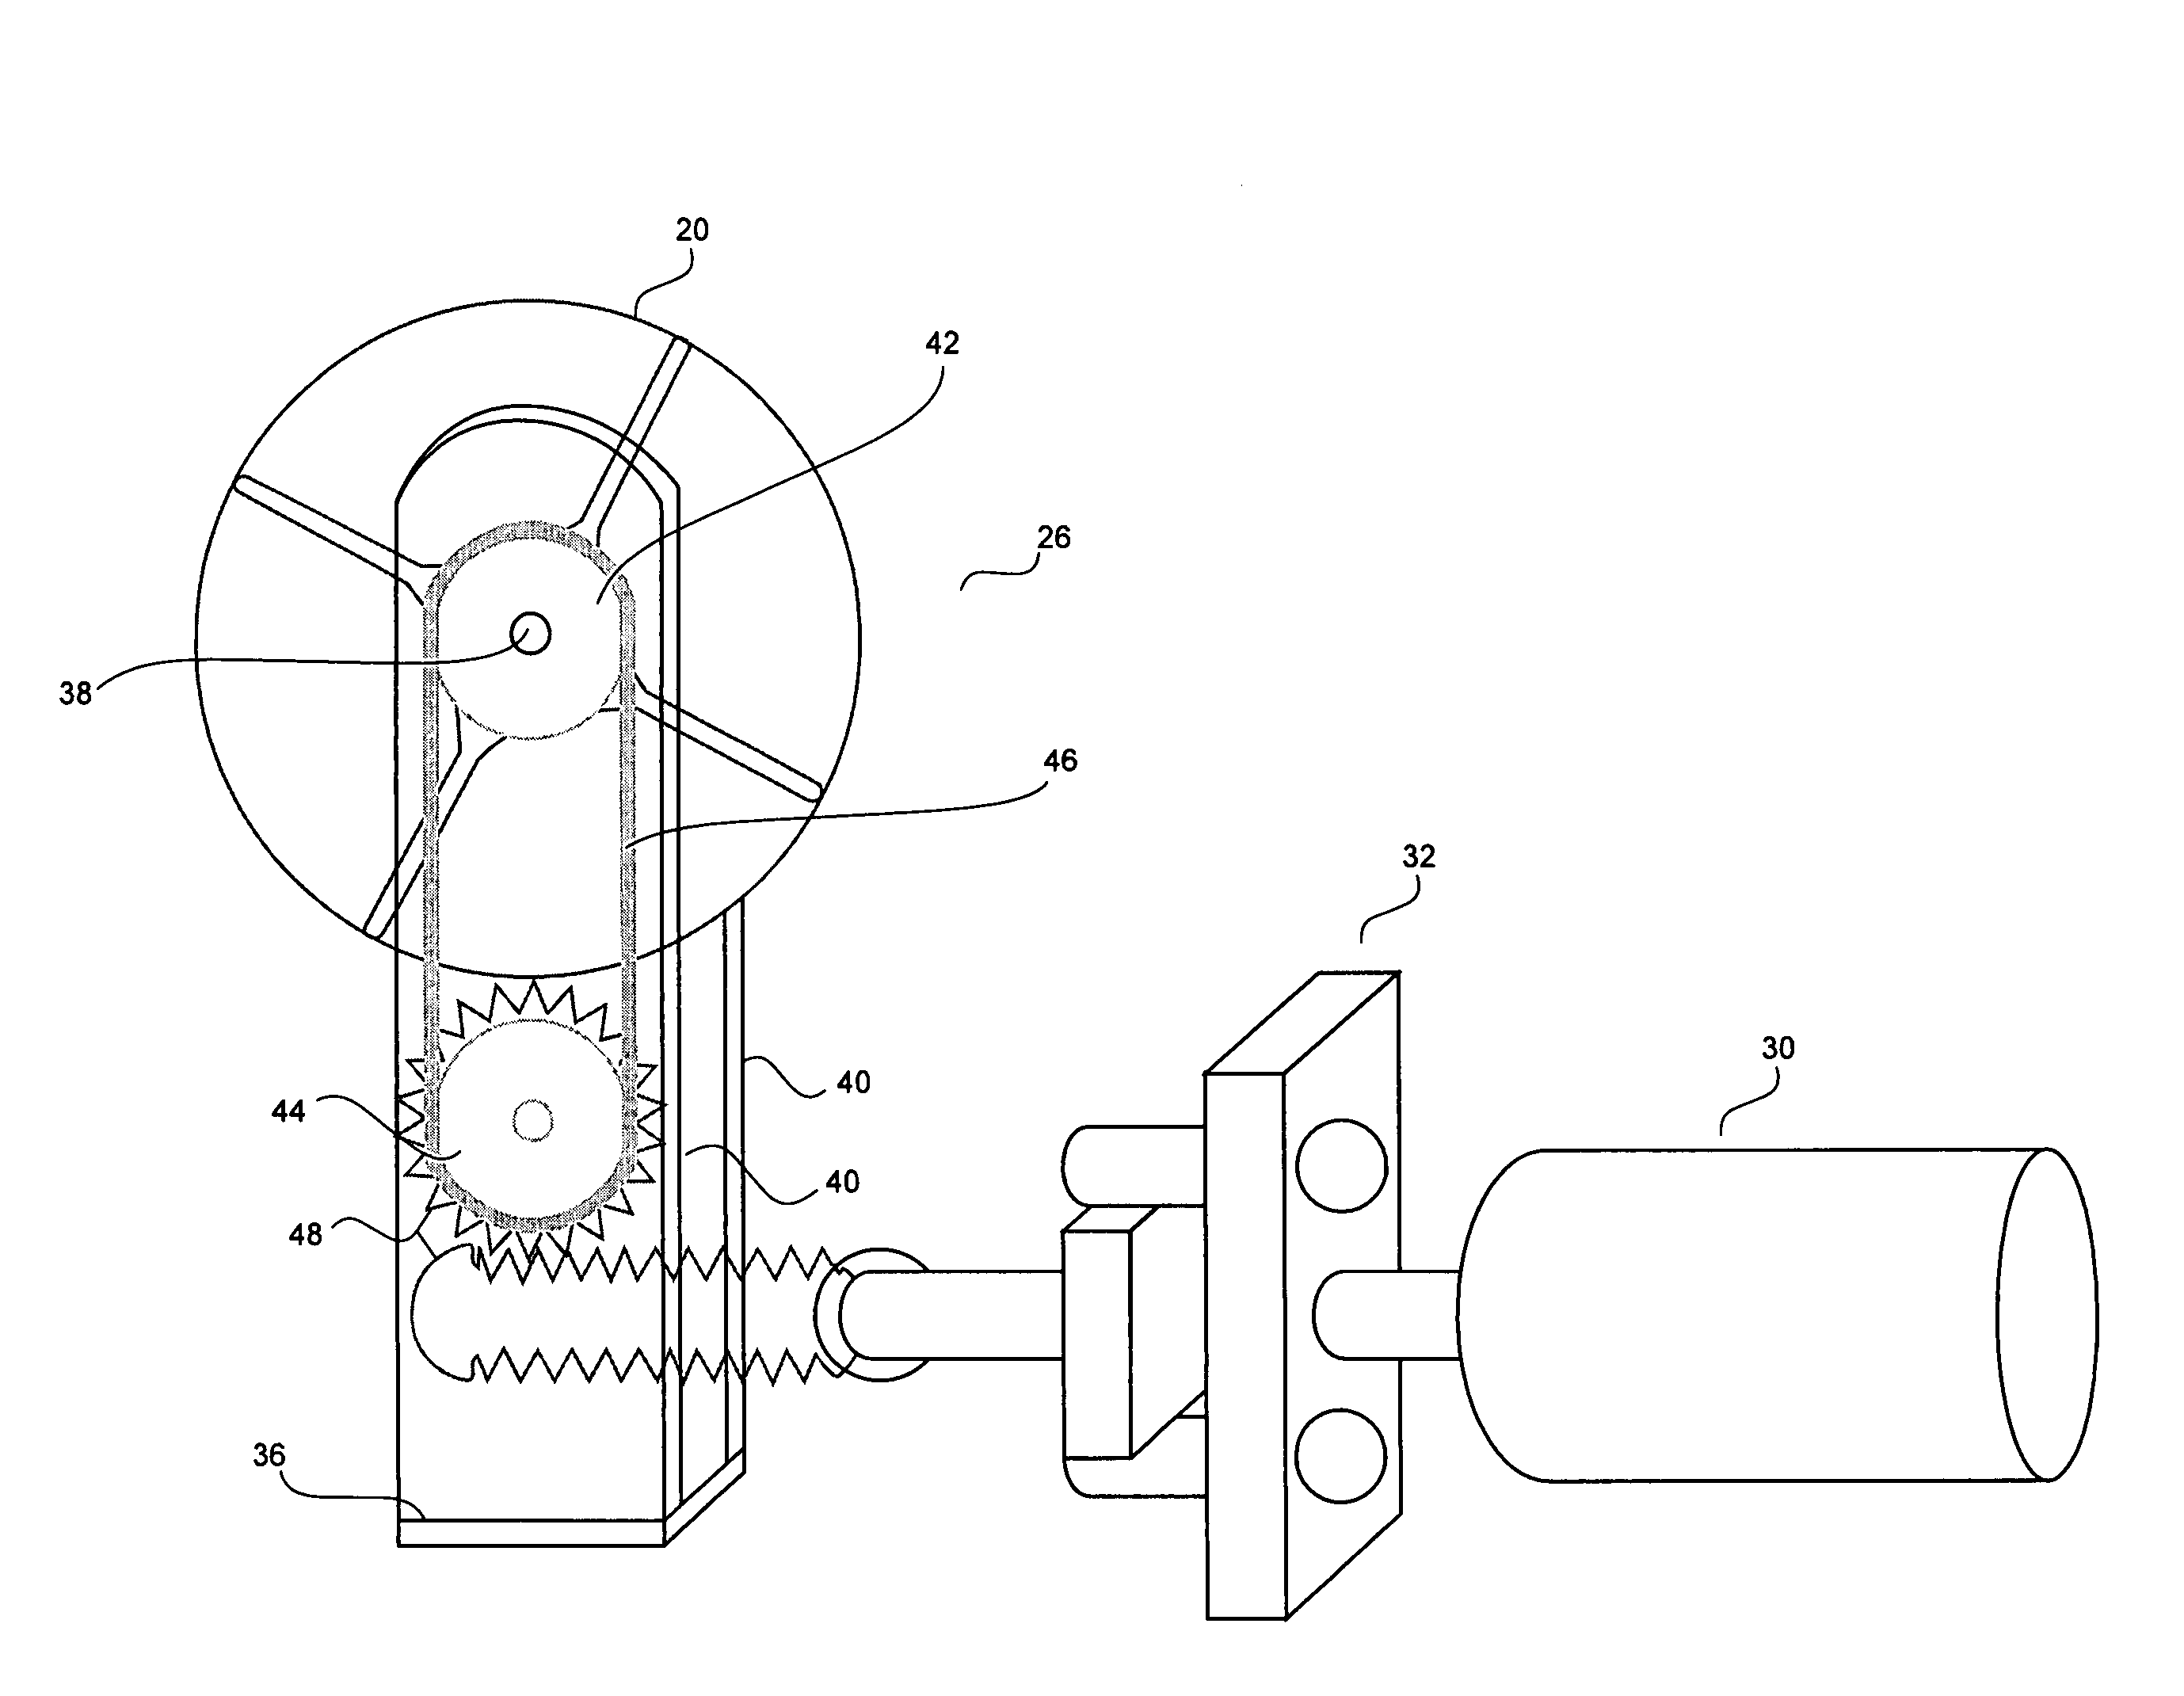 Method and apparatus for weighing divided portions